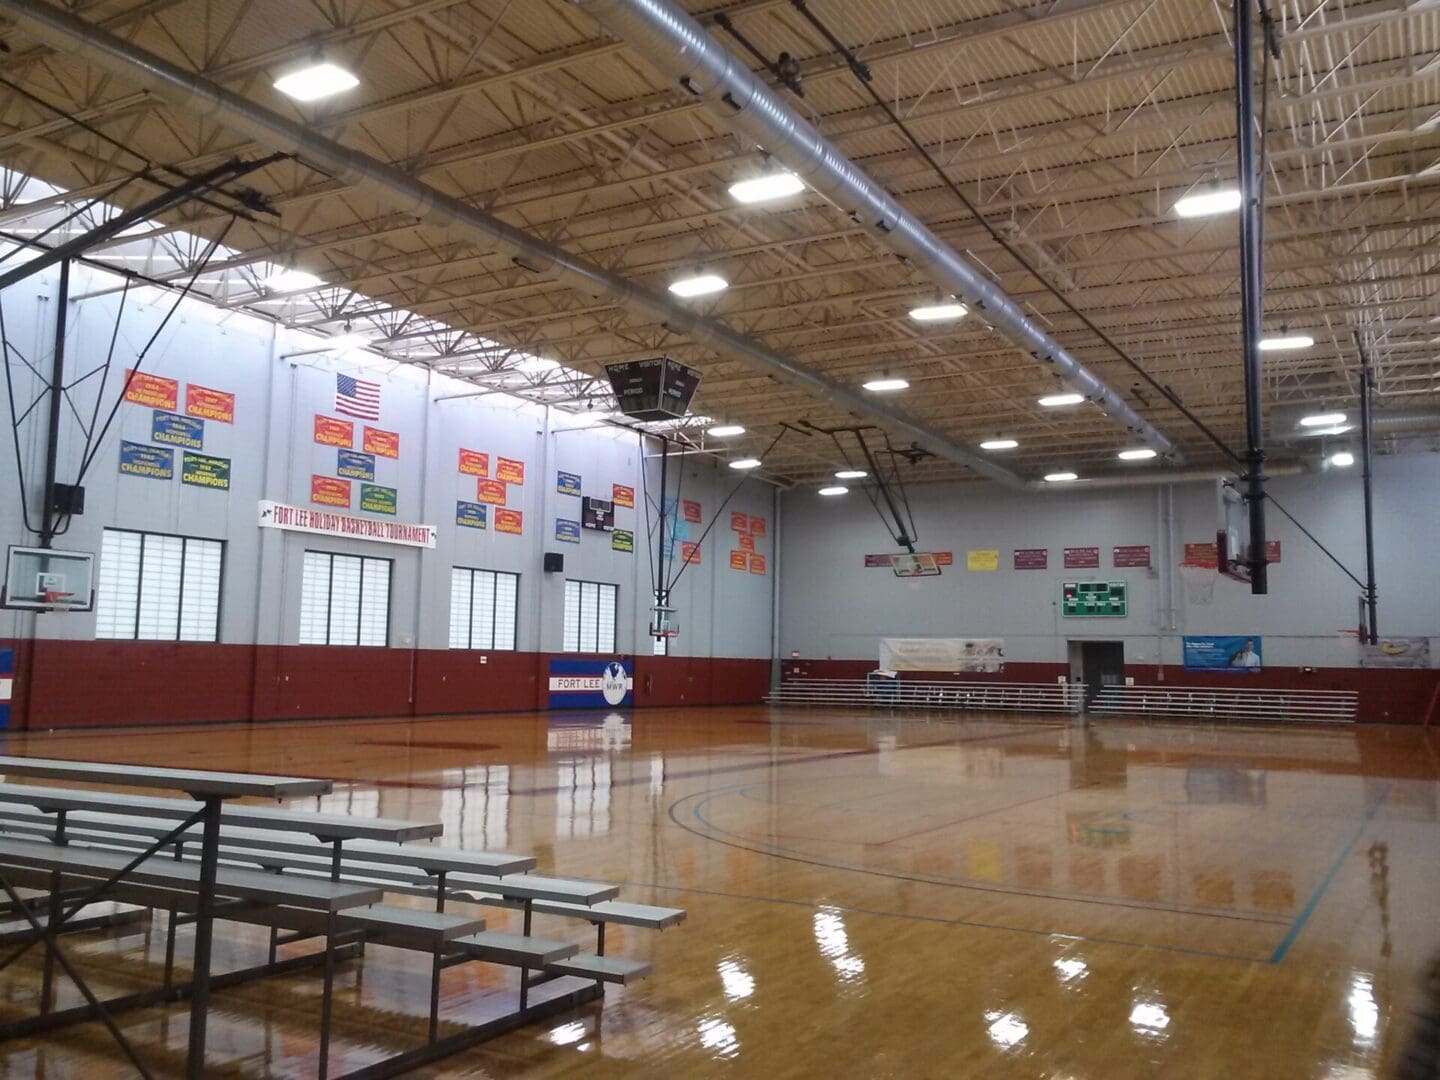 A gym with benches and bleachers in it